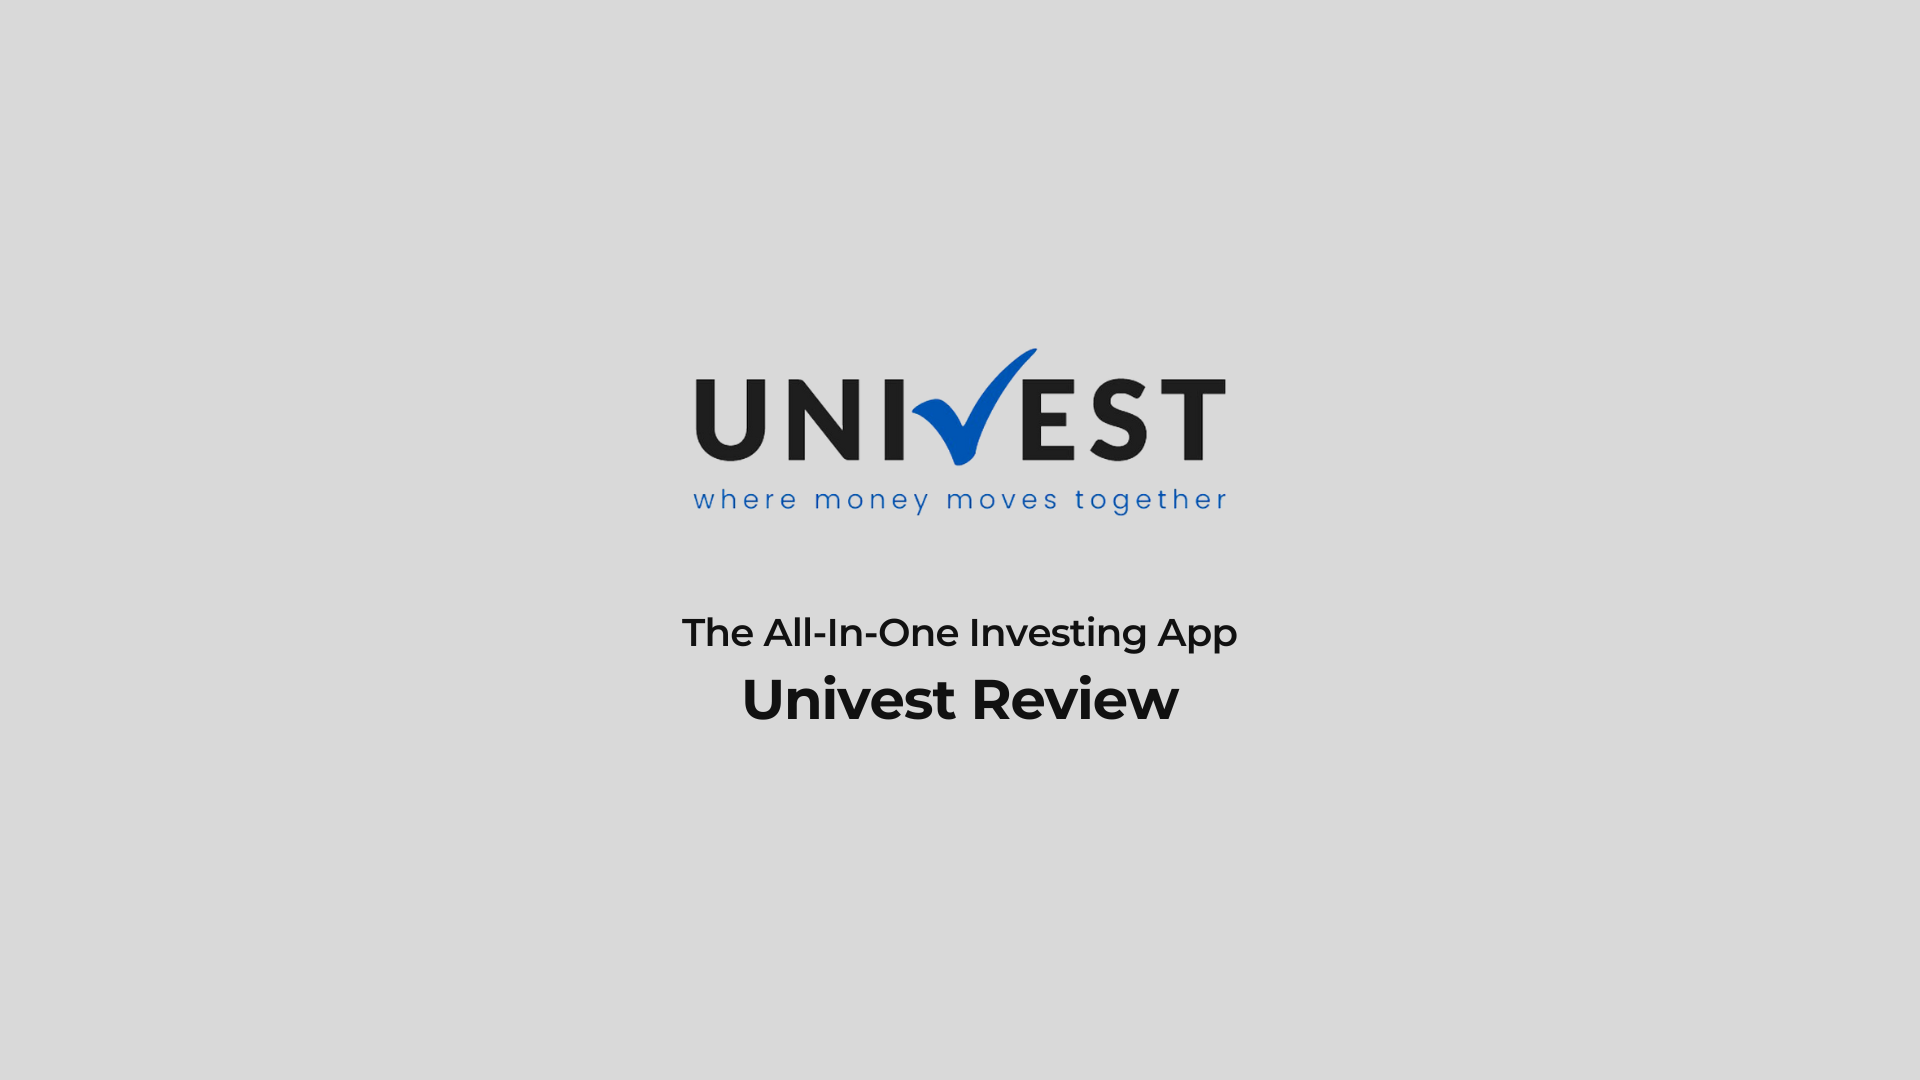 univest-review-the-all-in-one-investing-app-aayush-bhaskar